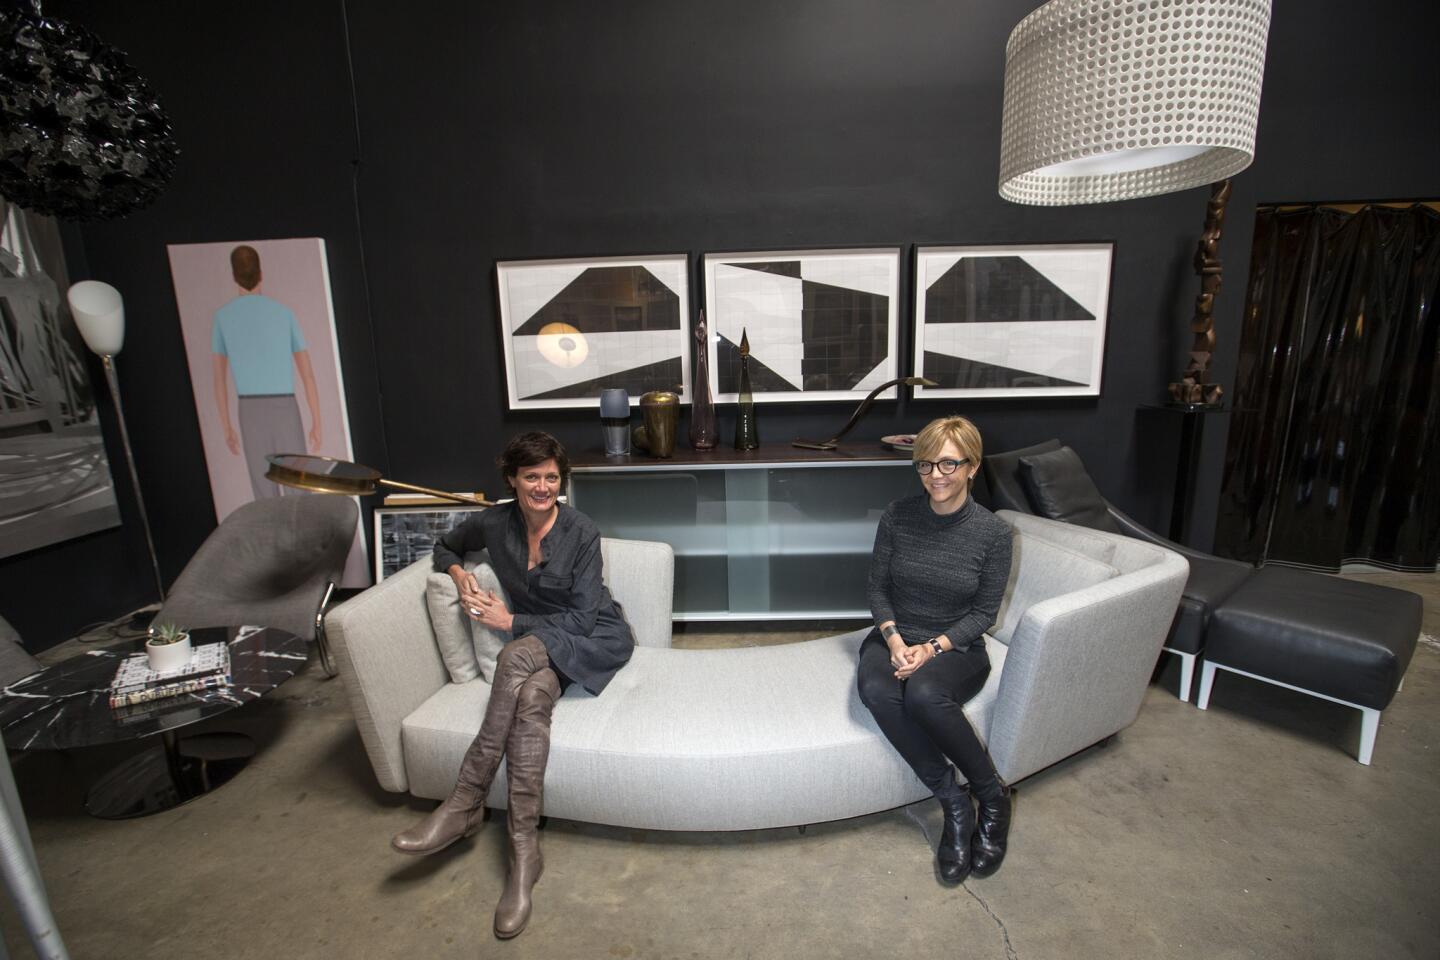 Stacia Vinar, left, and Sarah Whipple, owners of Modern Resale, sit among some of the modern European furniture, lighting and accessories at their Los Angeles showroom. The pieces are secondhand but inspected for quality.